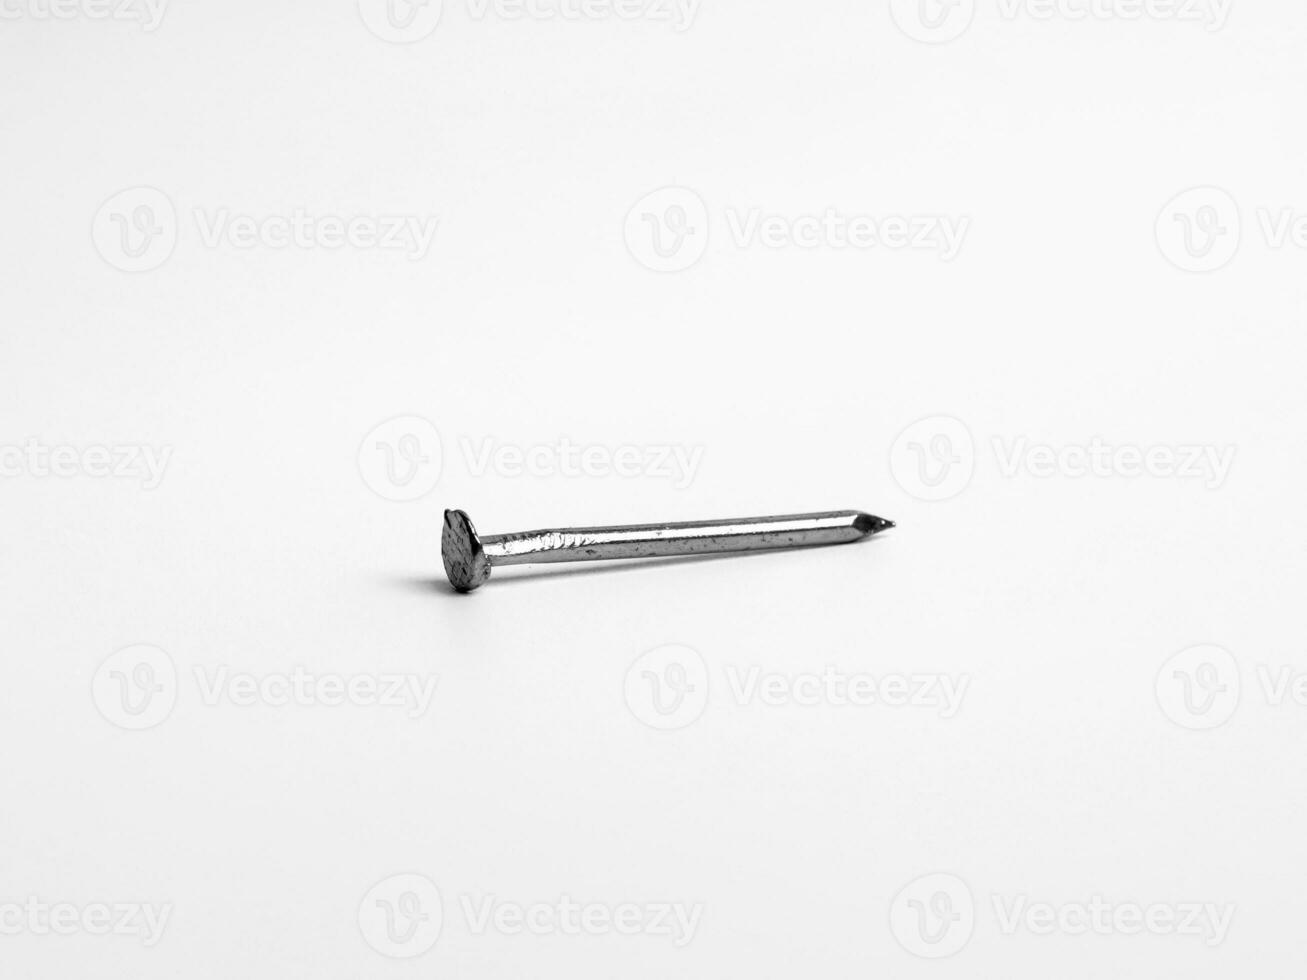 One Silver Shiny Sharp Metal Nail Closeup Photo Isolated On White Background